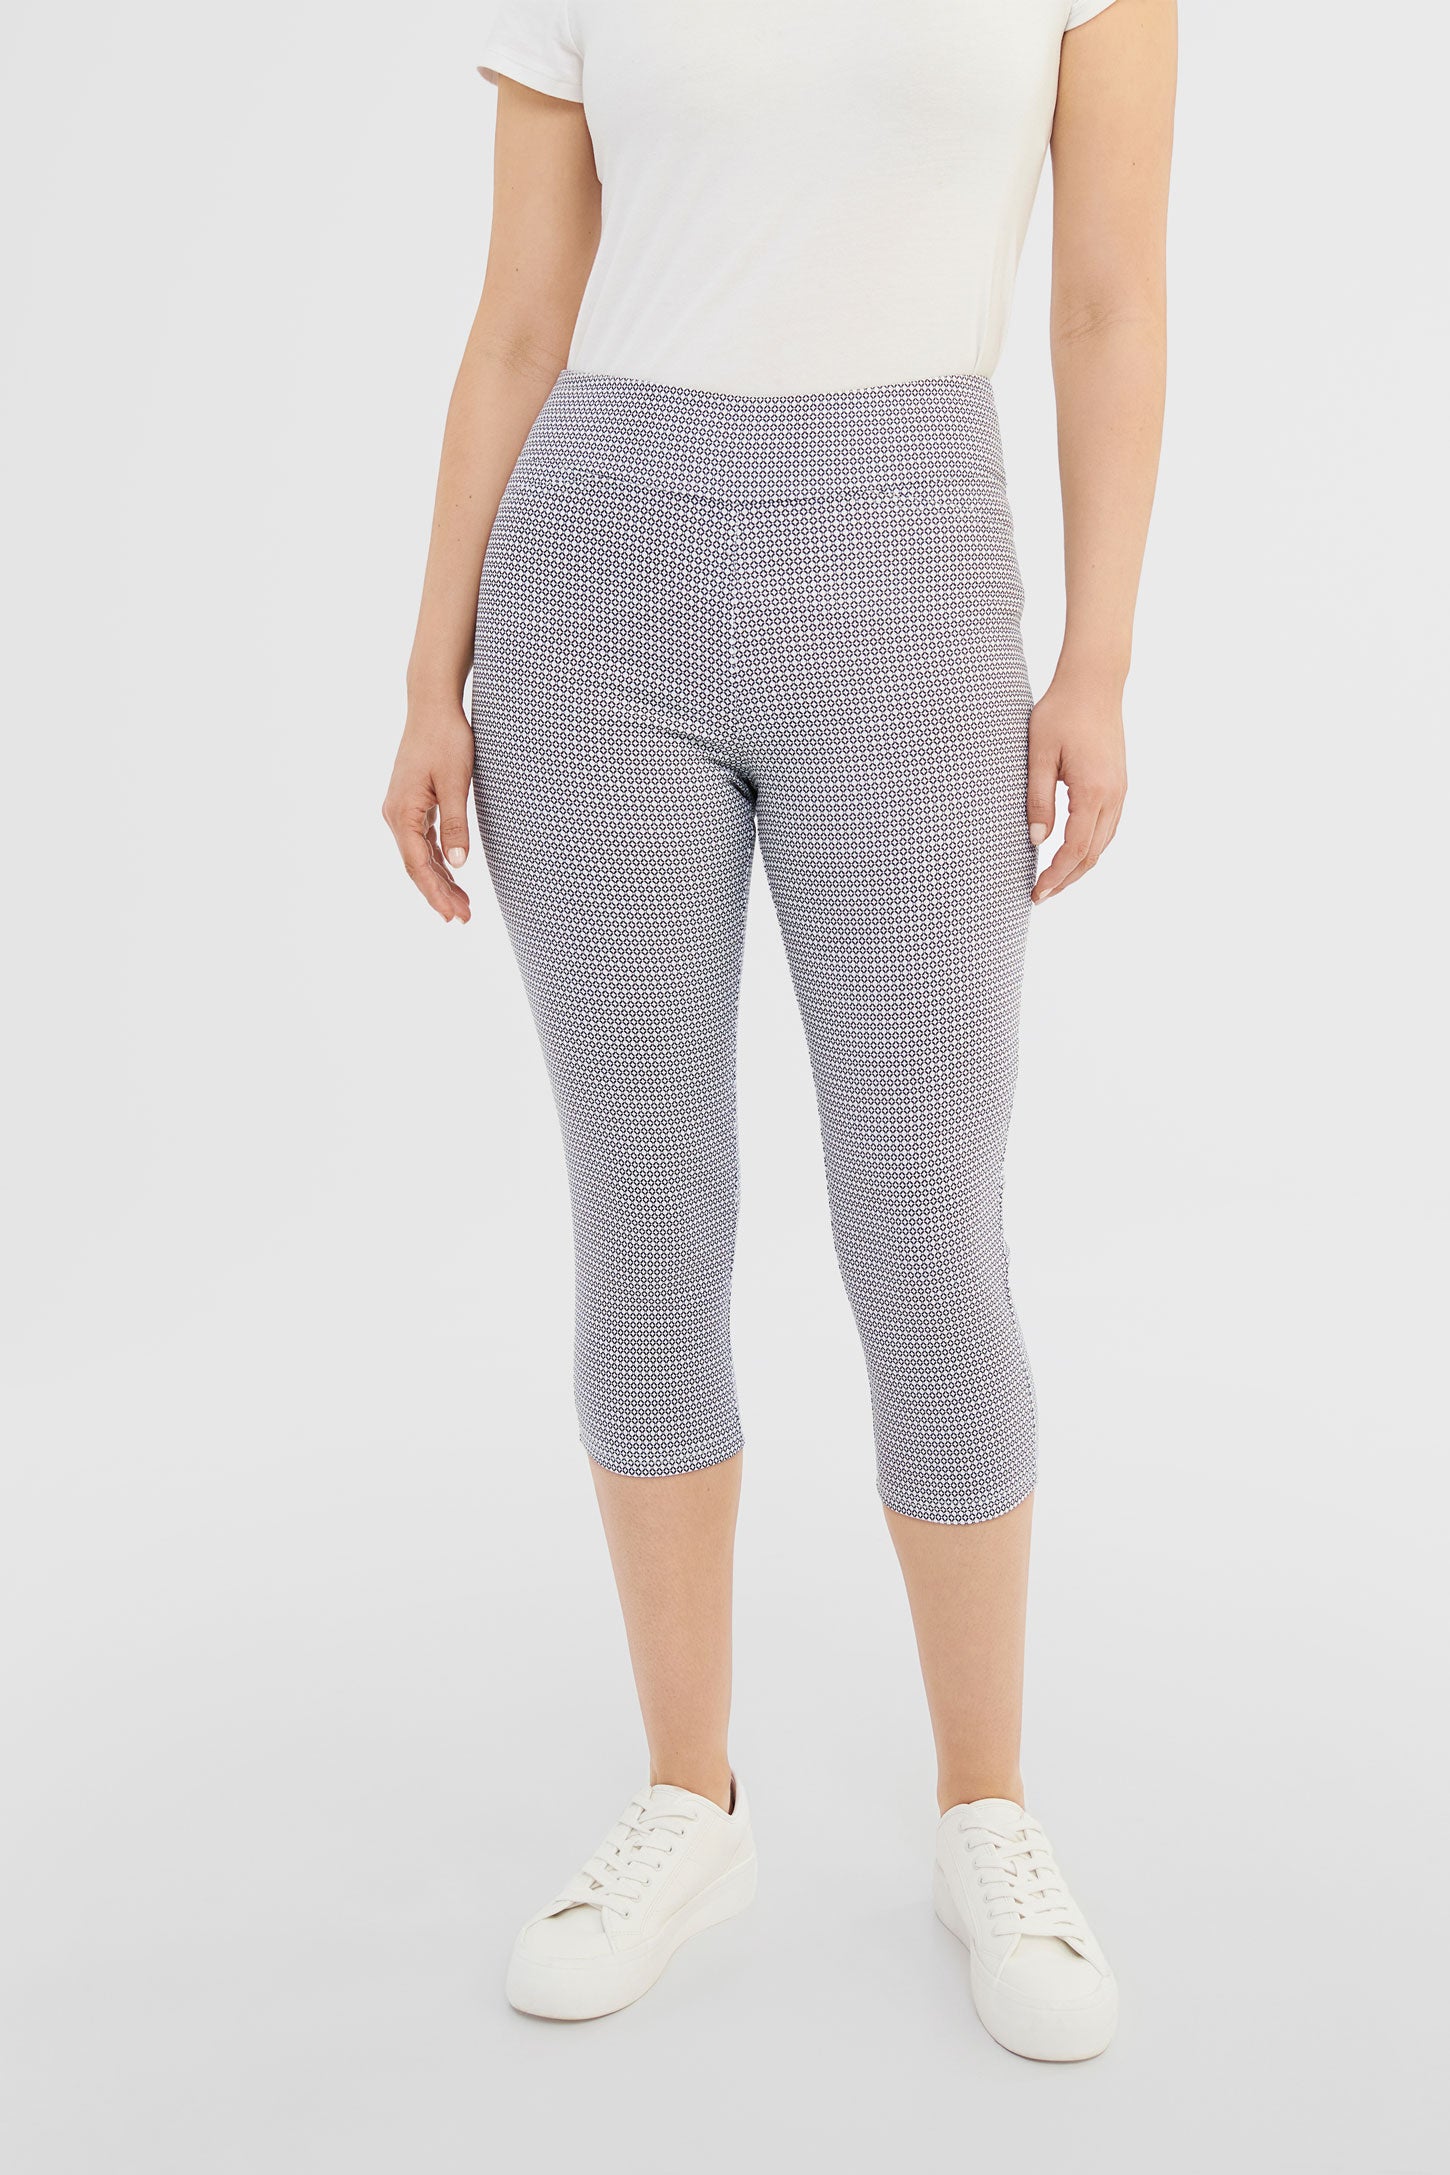 Pull-on printed fitted capris - Women